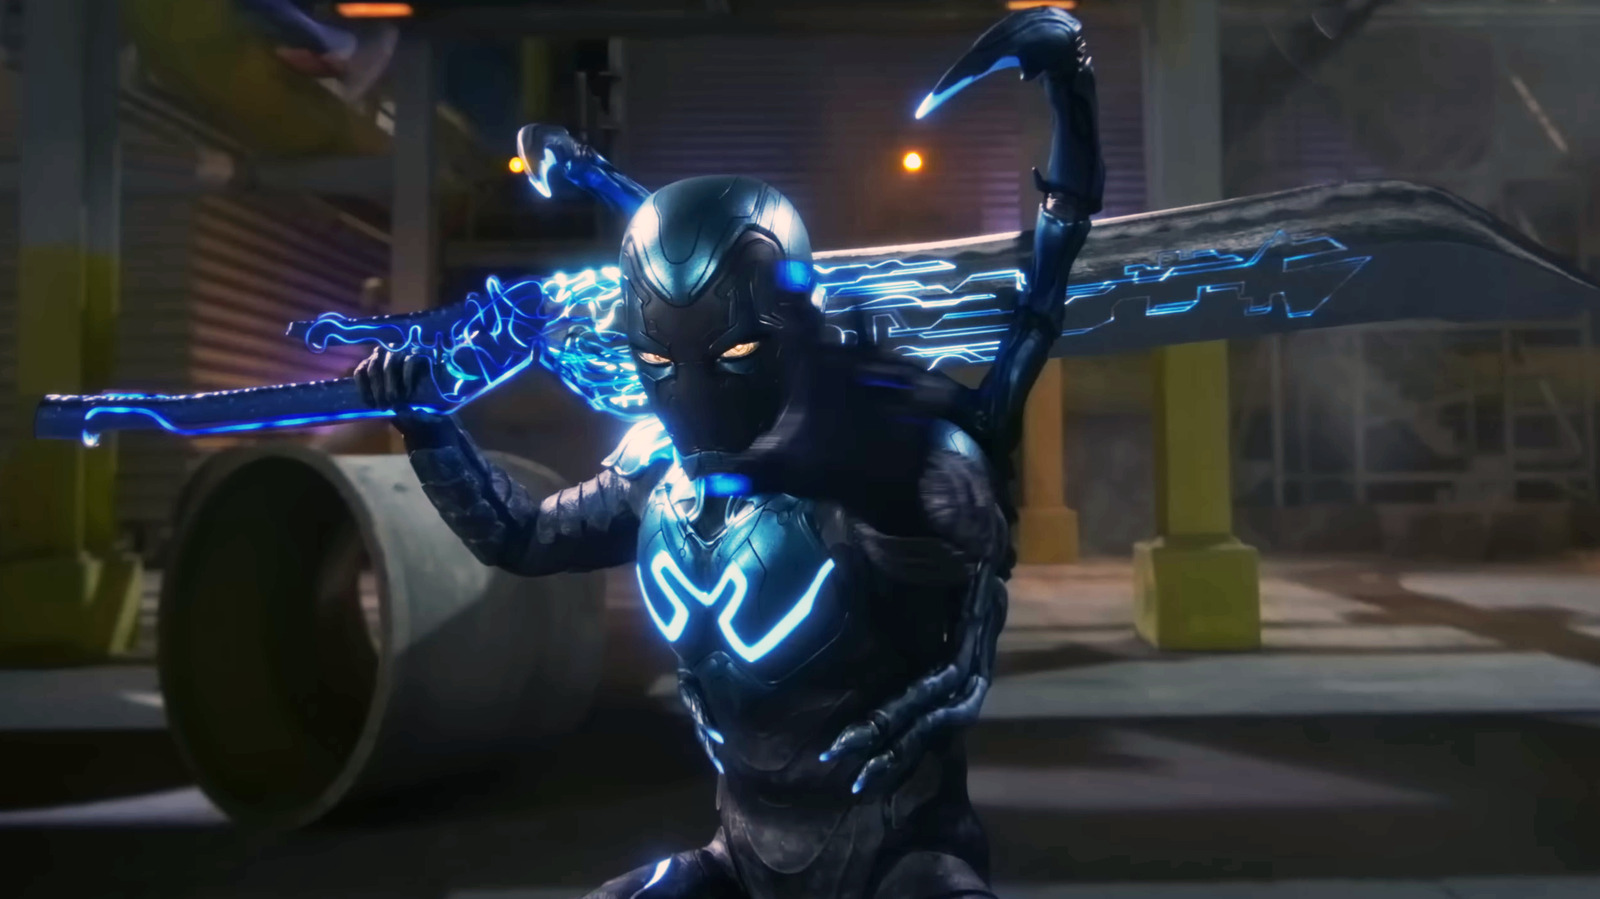 Who Are the First Two Blue Beetles in the BLUE BEETLE Movie?